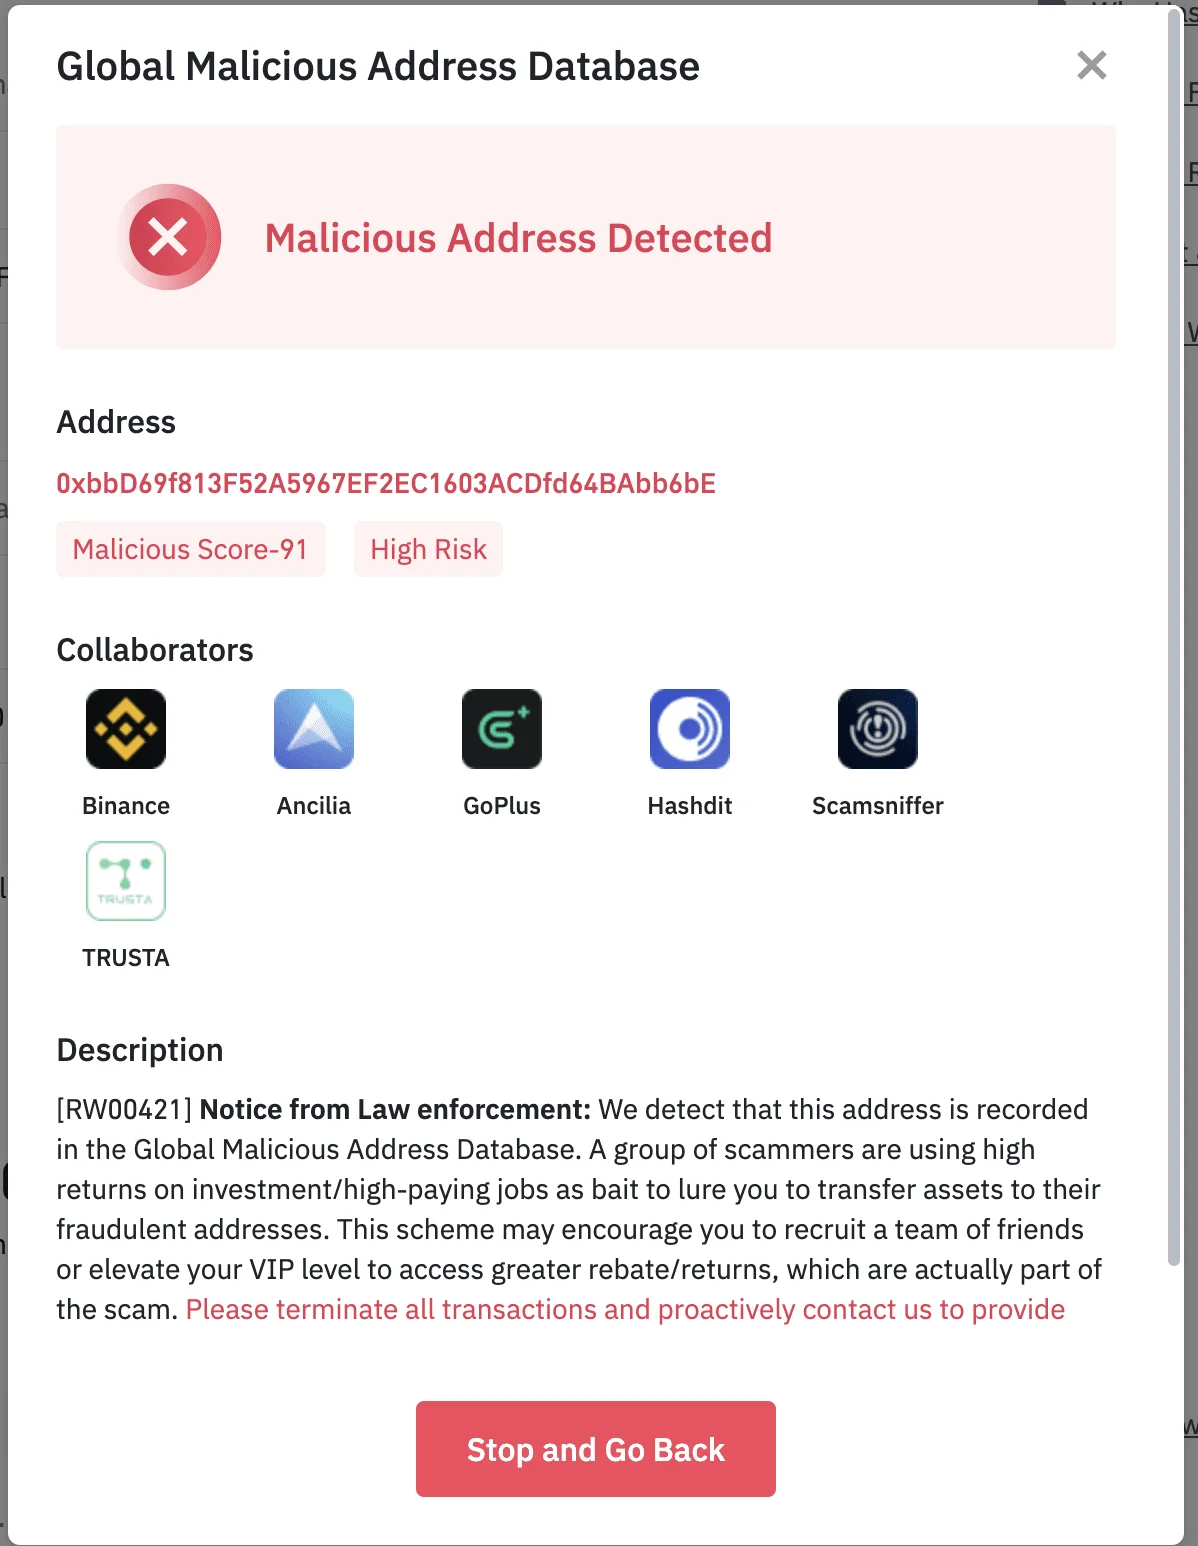 Binance's 8 Levels of Anti-Scam Risk Control Measures: Global Malicious Address Database Alert